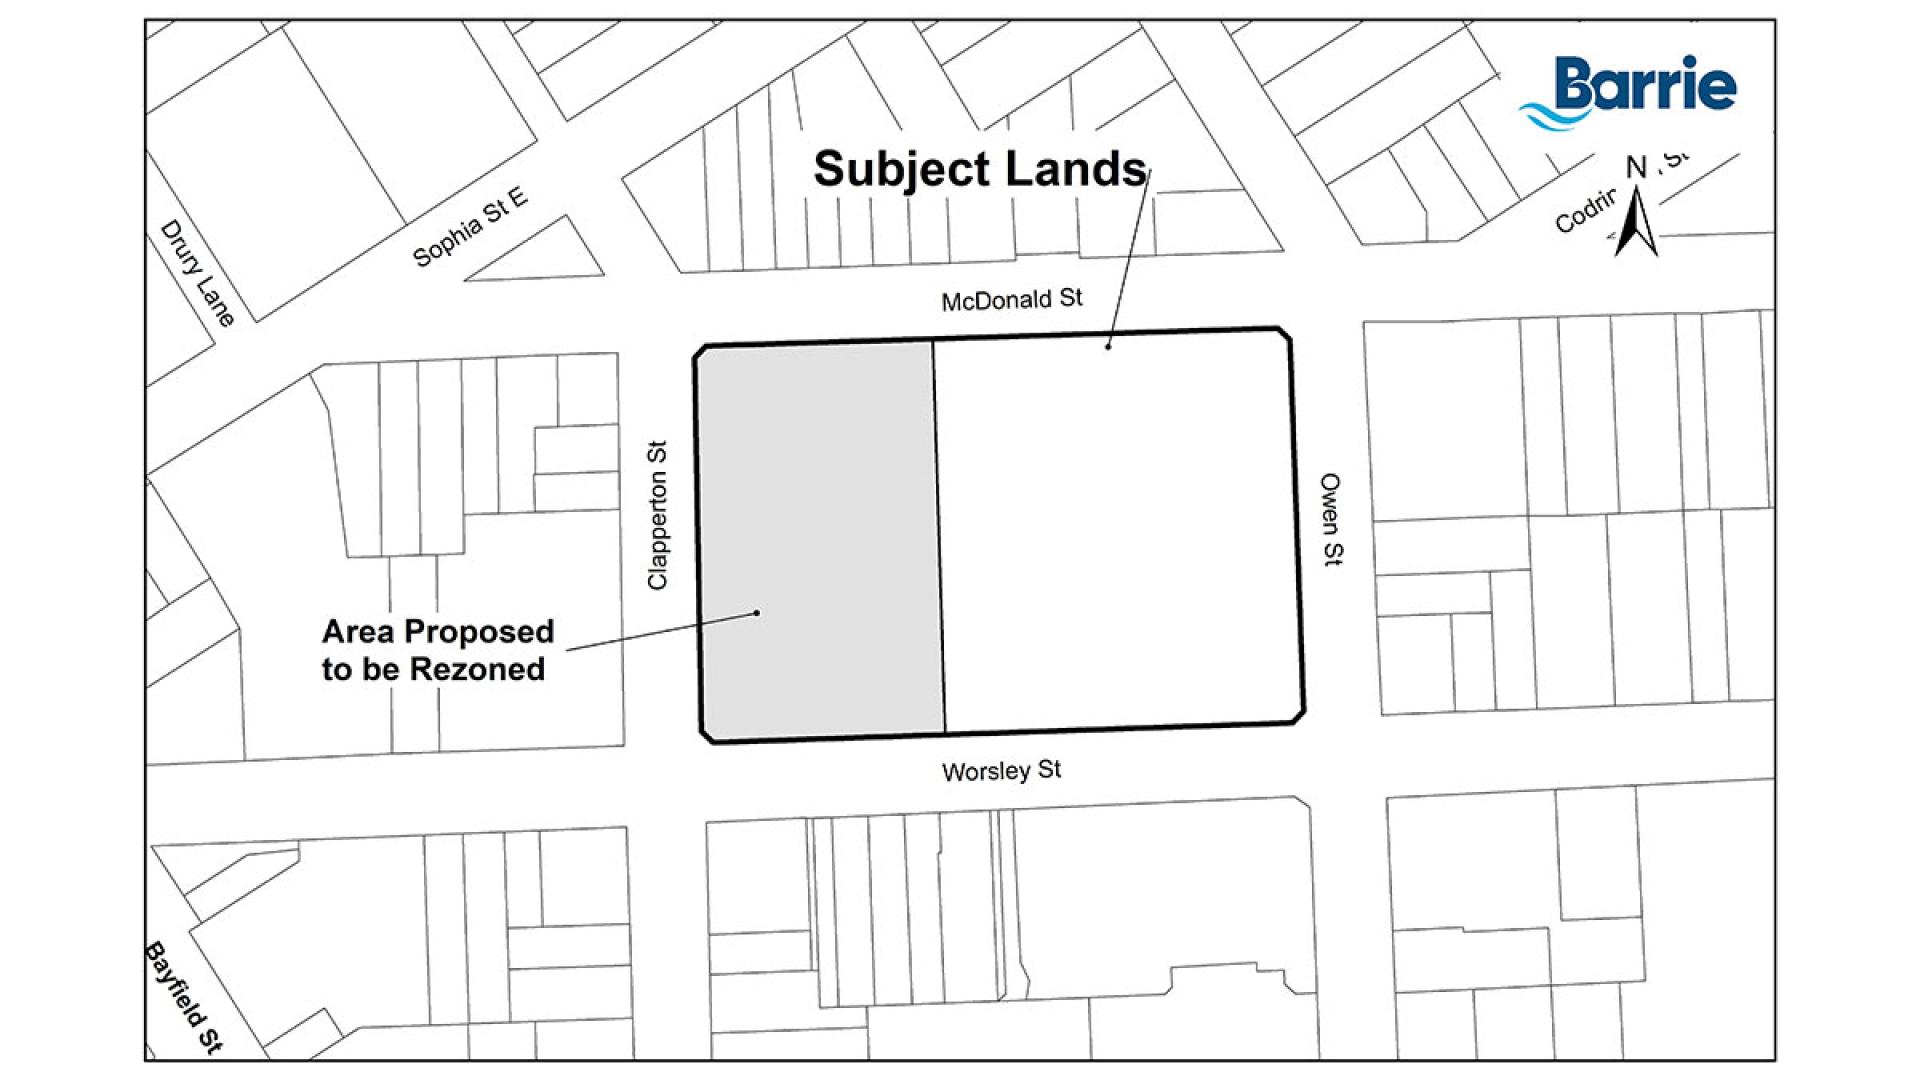 Key map of subject lands for a proposed development at 50 Worsley Street, Barrie. 